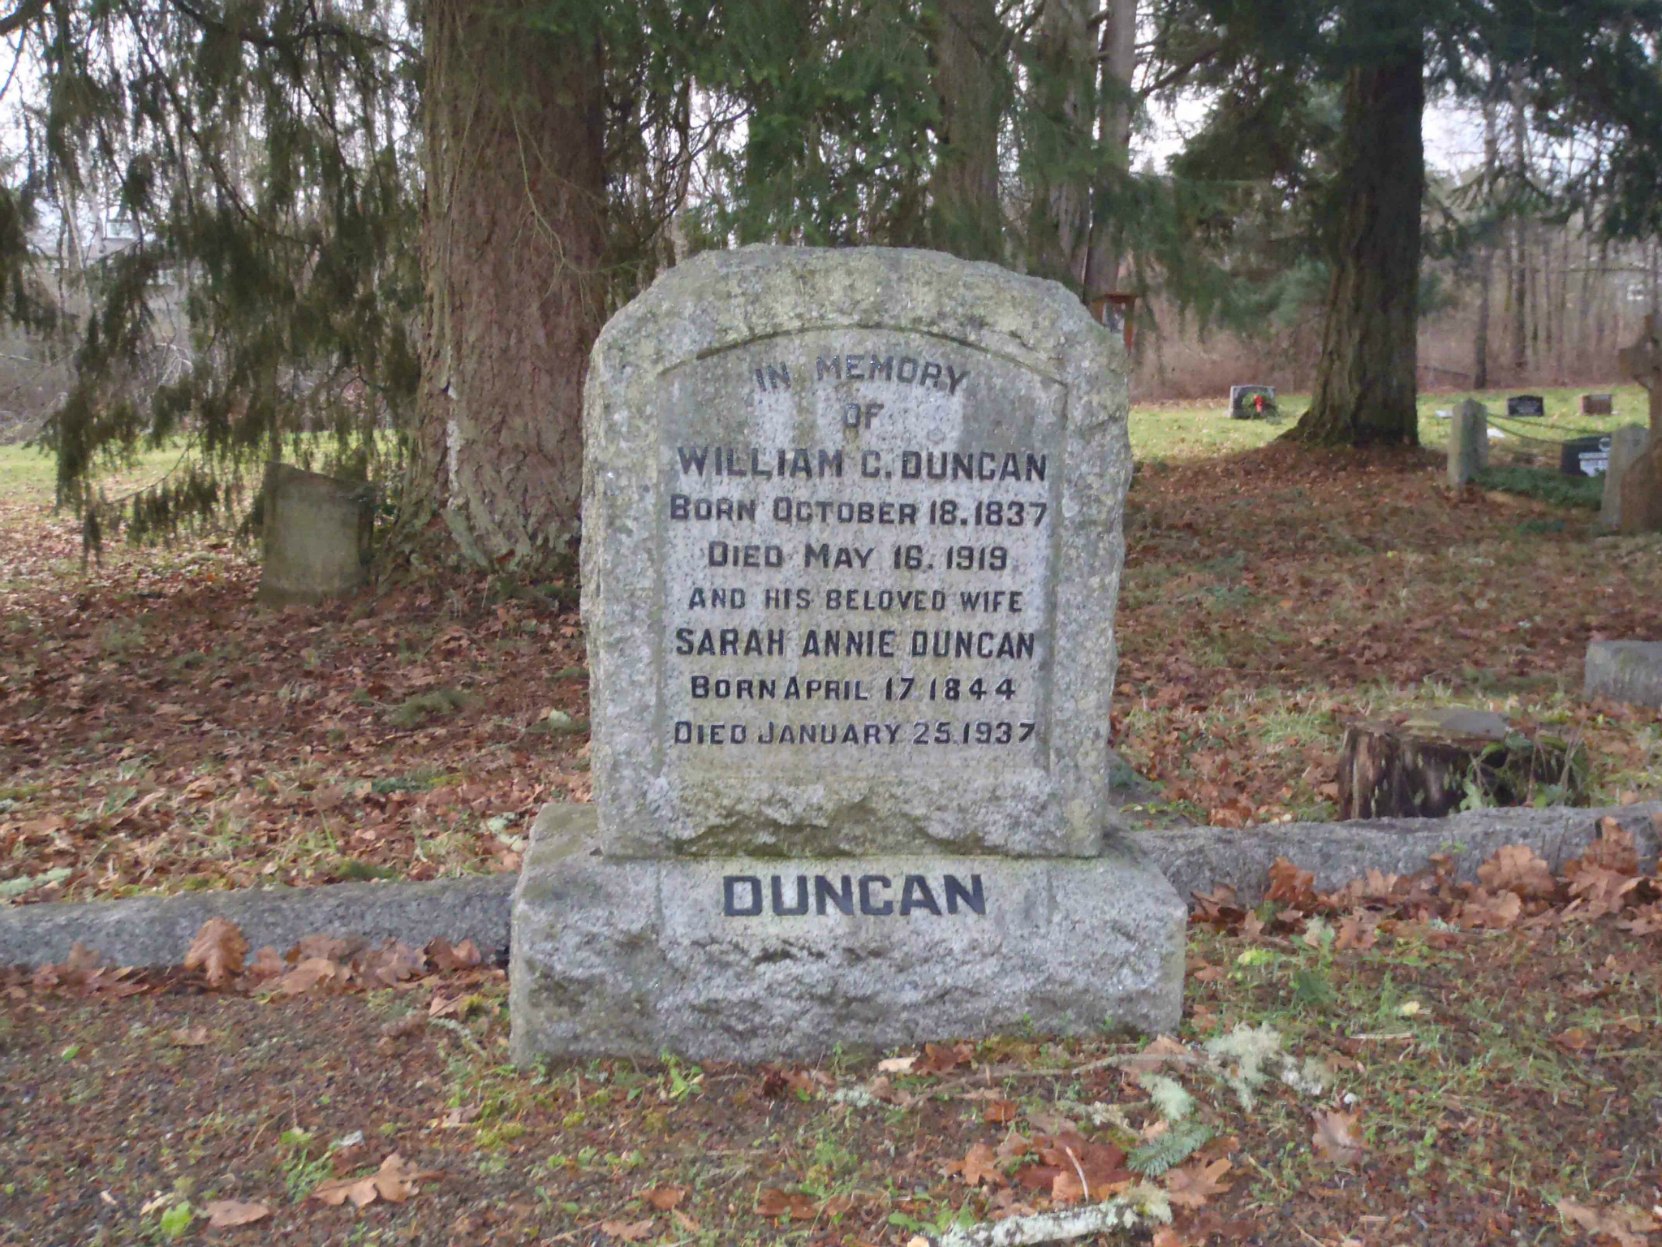 William Chalmers Duncan & Sarah Duncan grave, St. Peter's Quamichan, Anglican cemetery